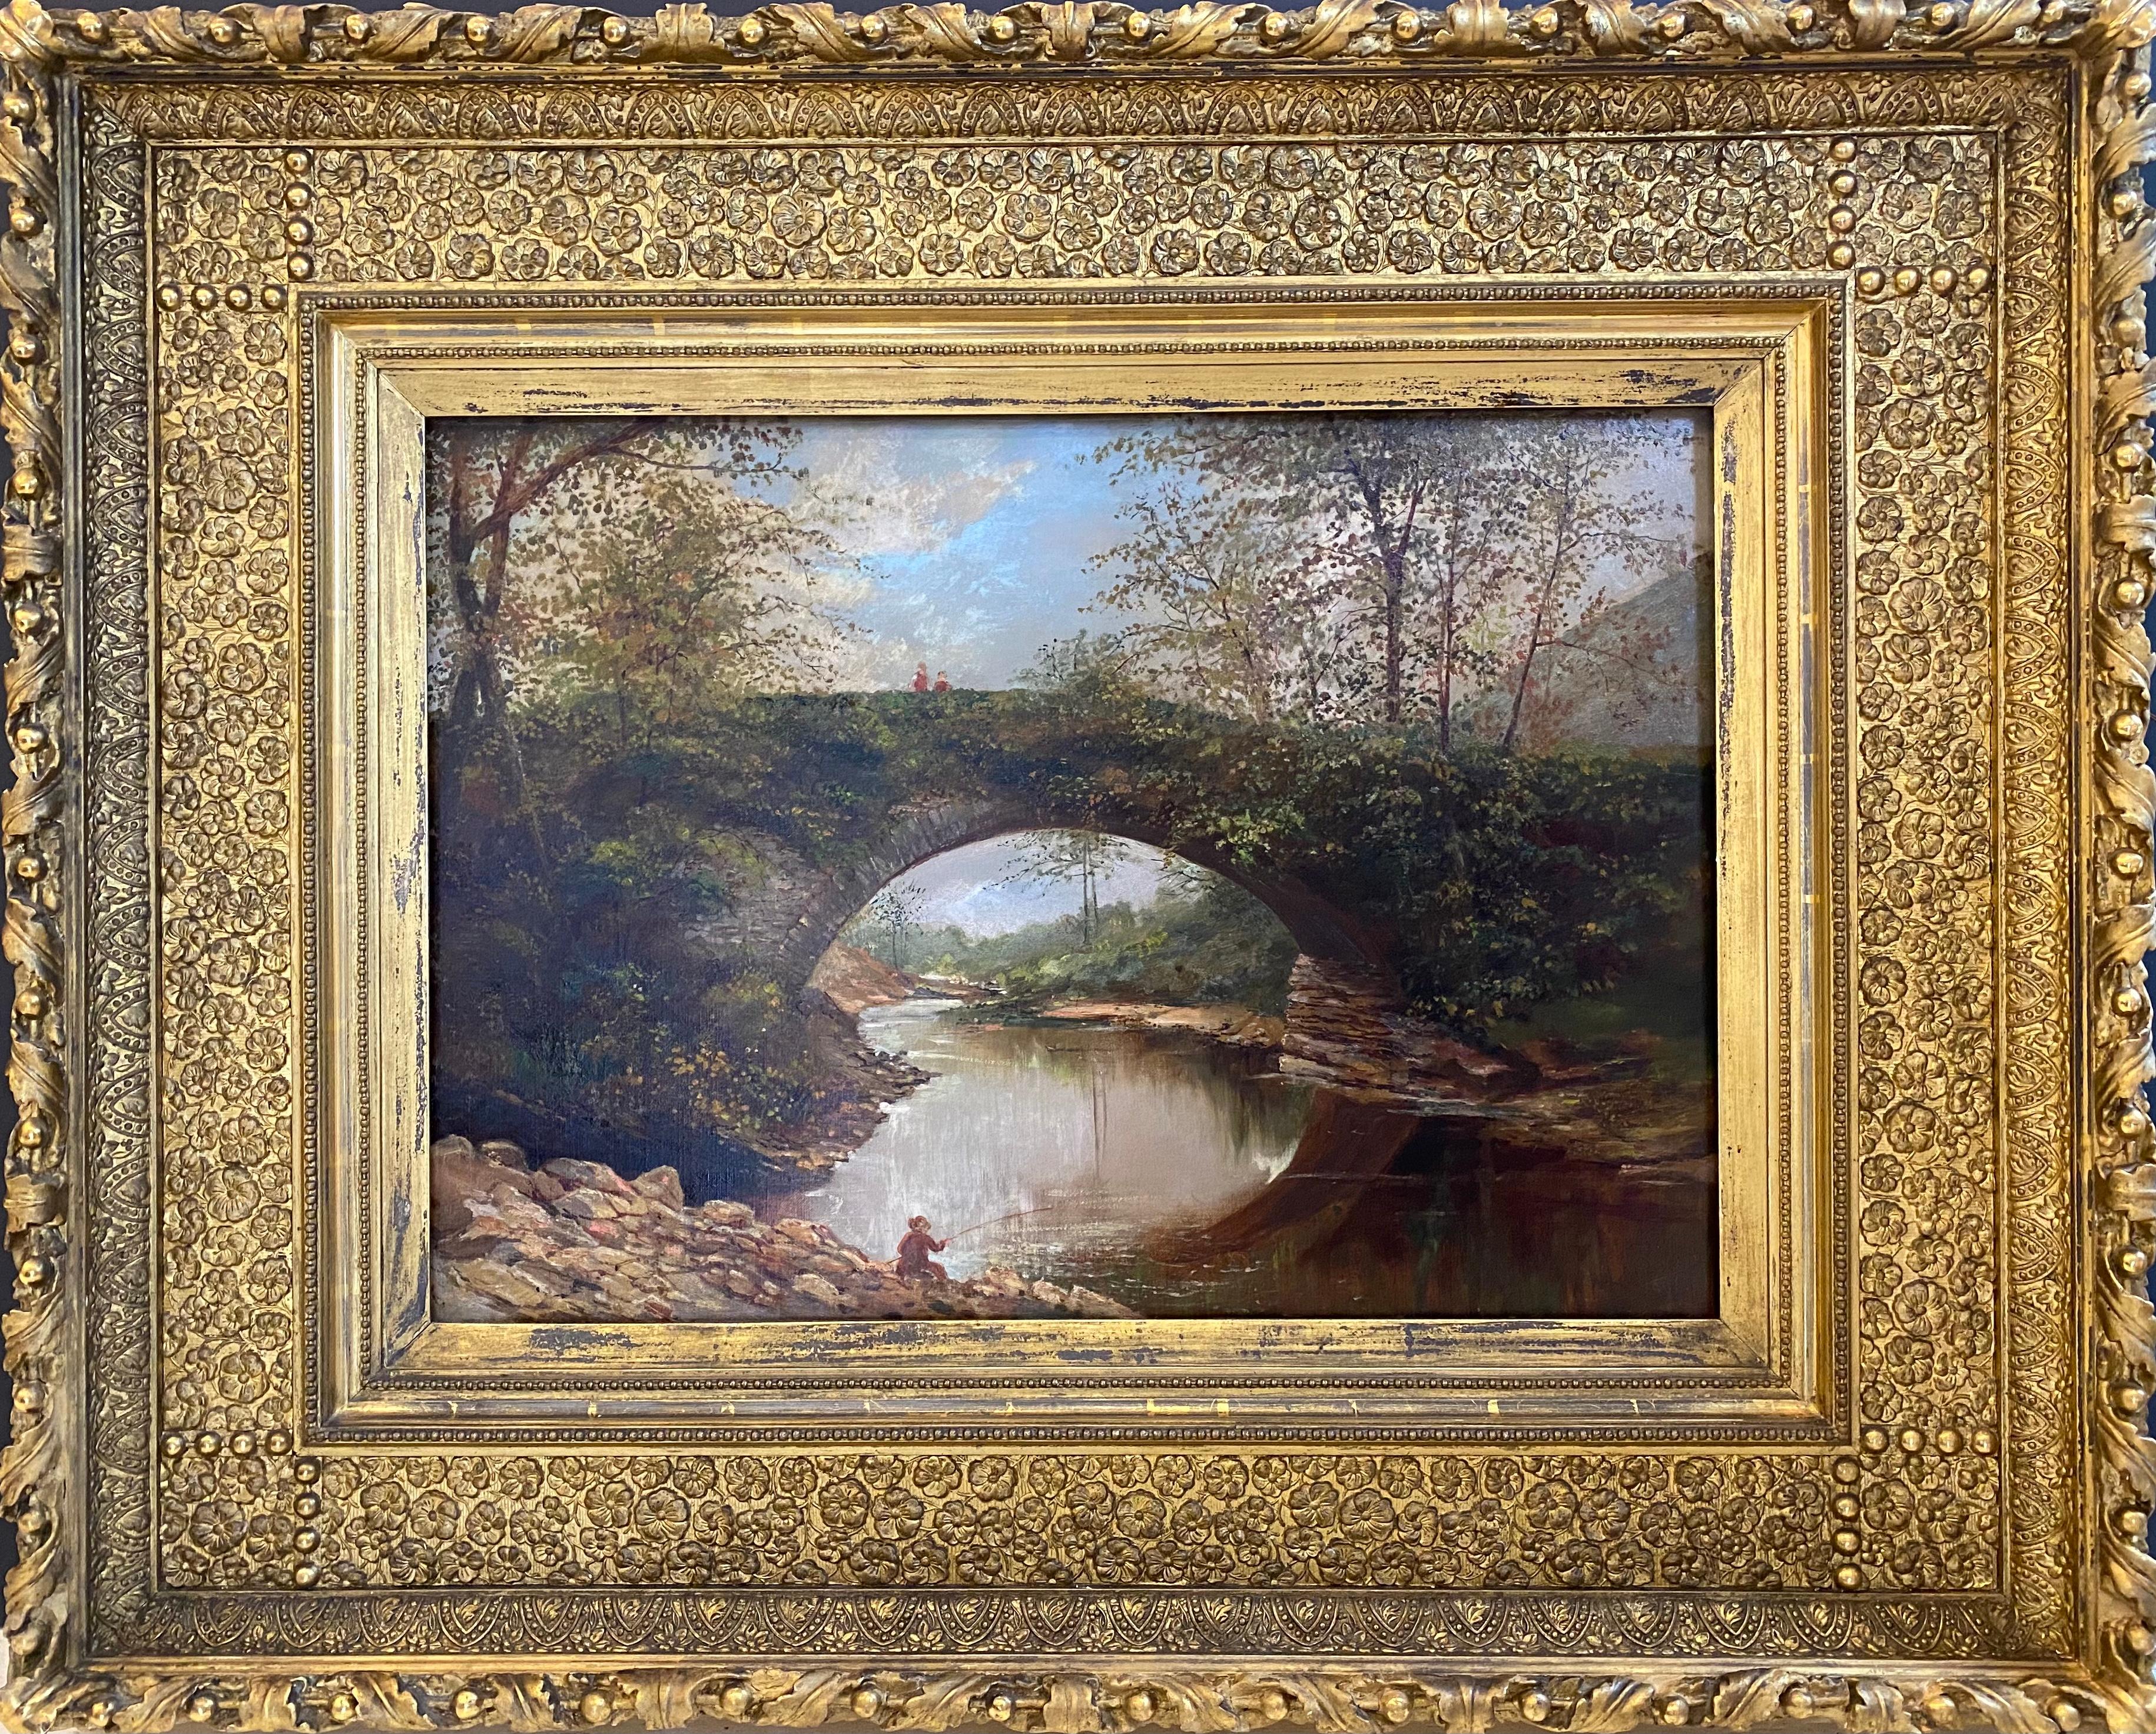 “The Old Bridge” - Painting by William Livingstone Anderson